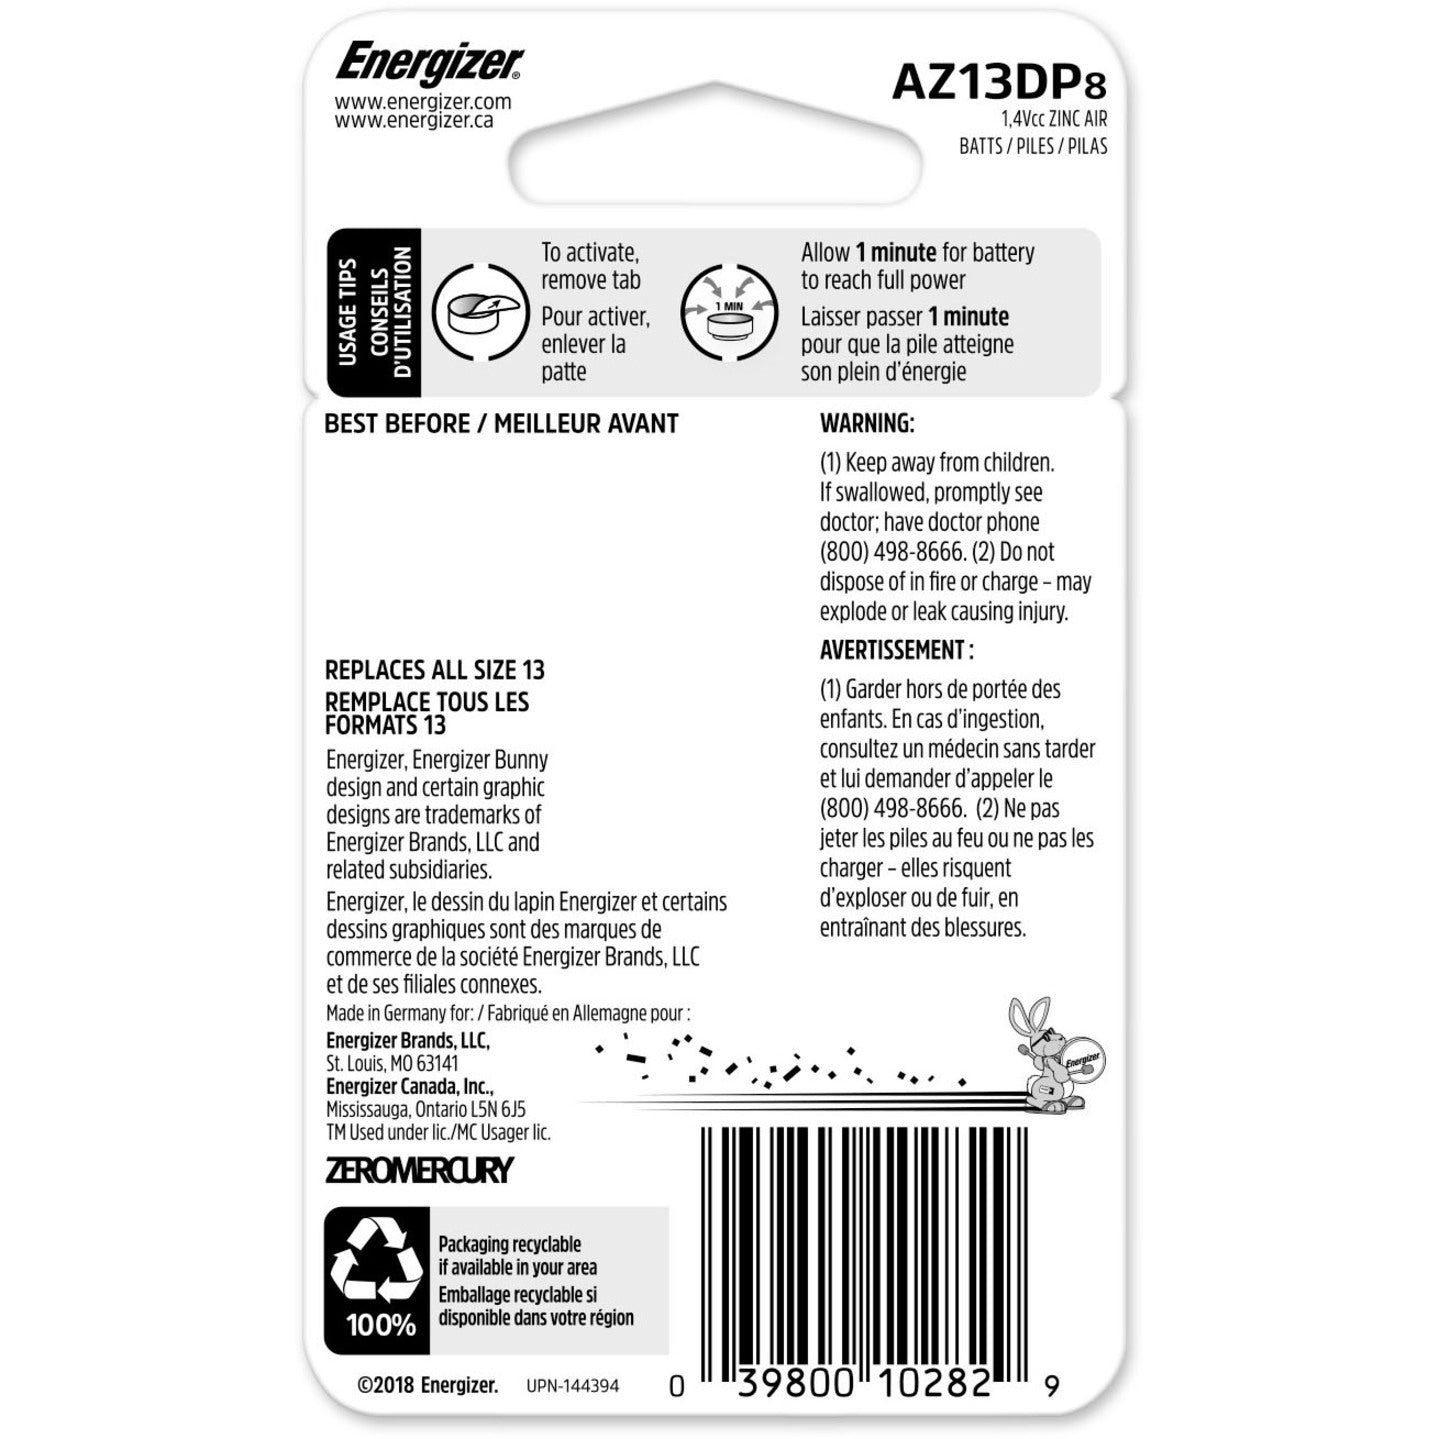 Energizer AZ13DP-8 EZ Turn & Lock Size 13 Coin Cell Hearing Aid Battery, 8-Pack